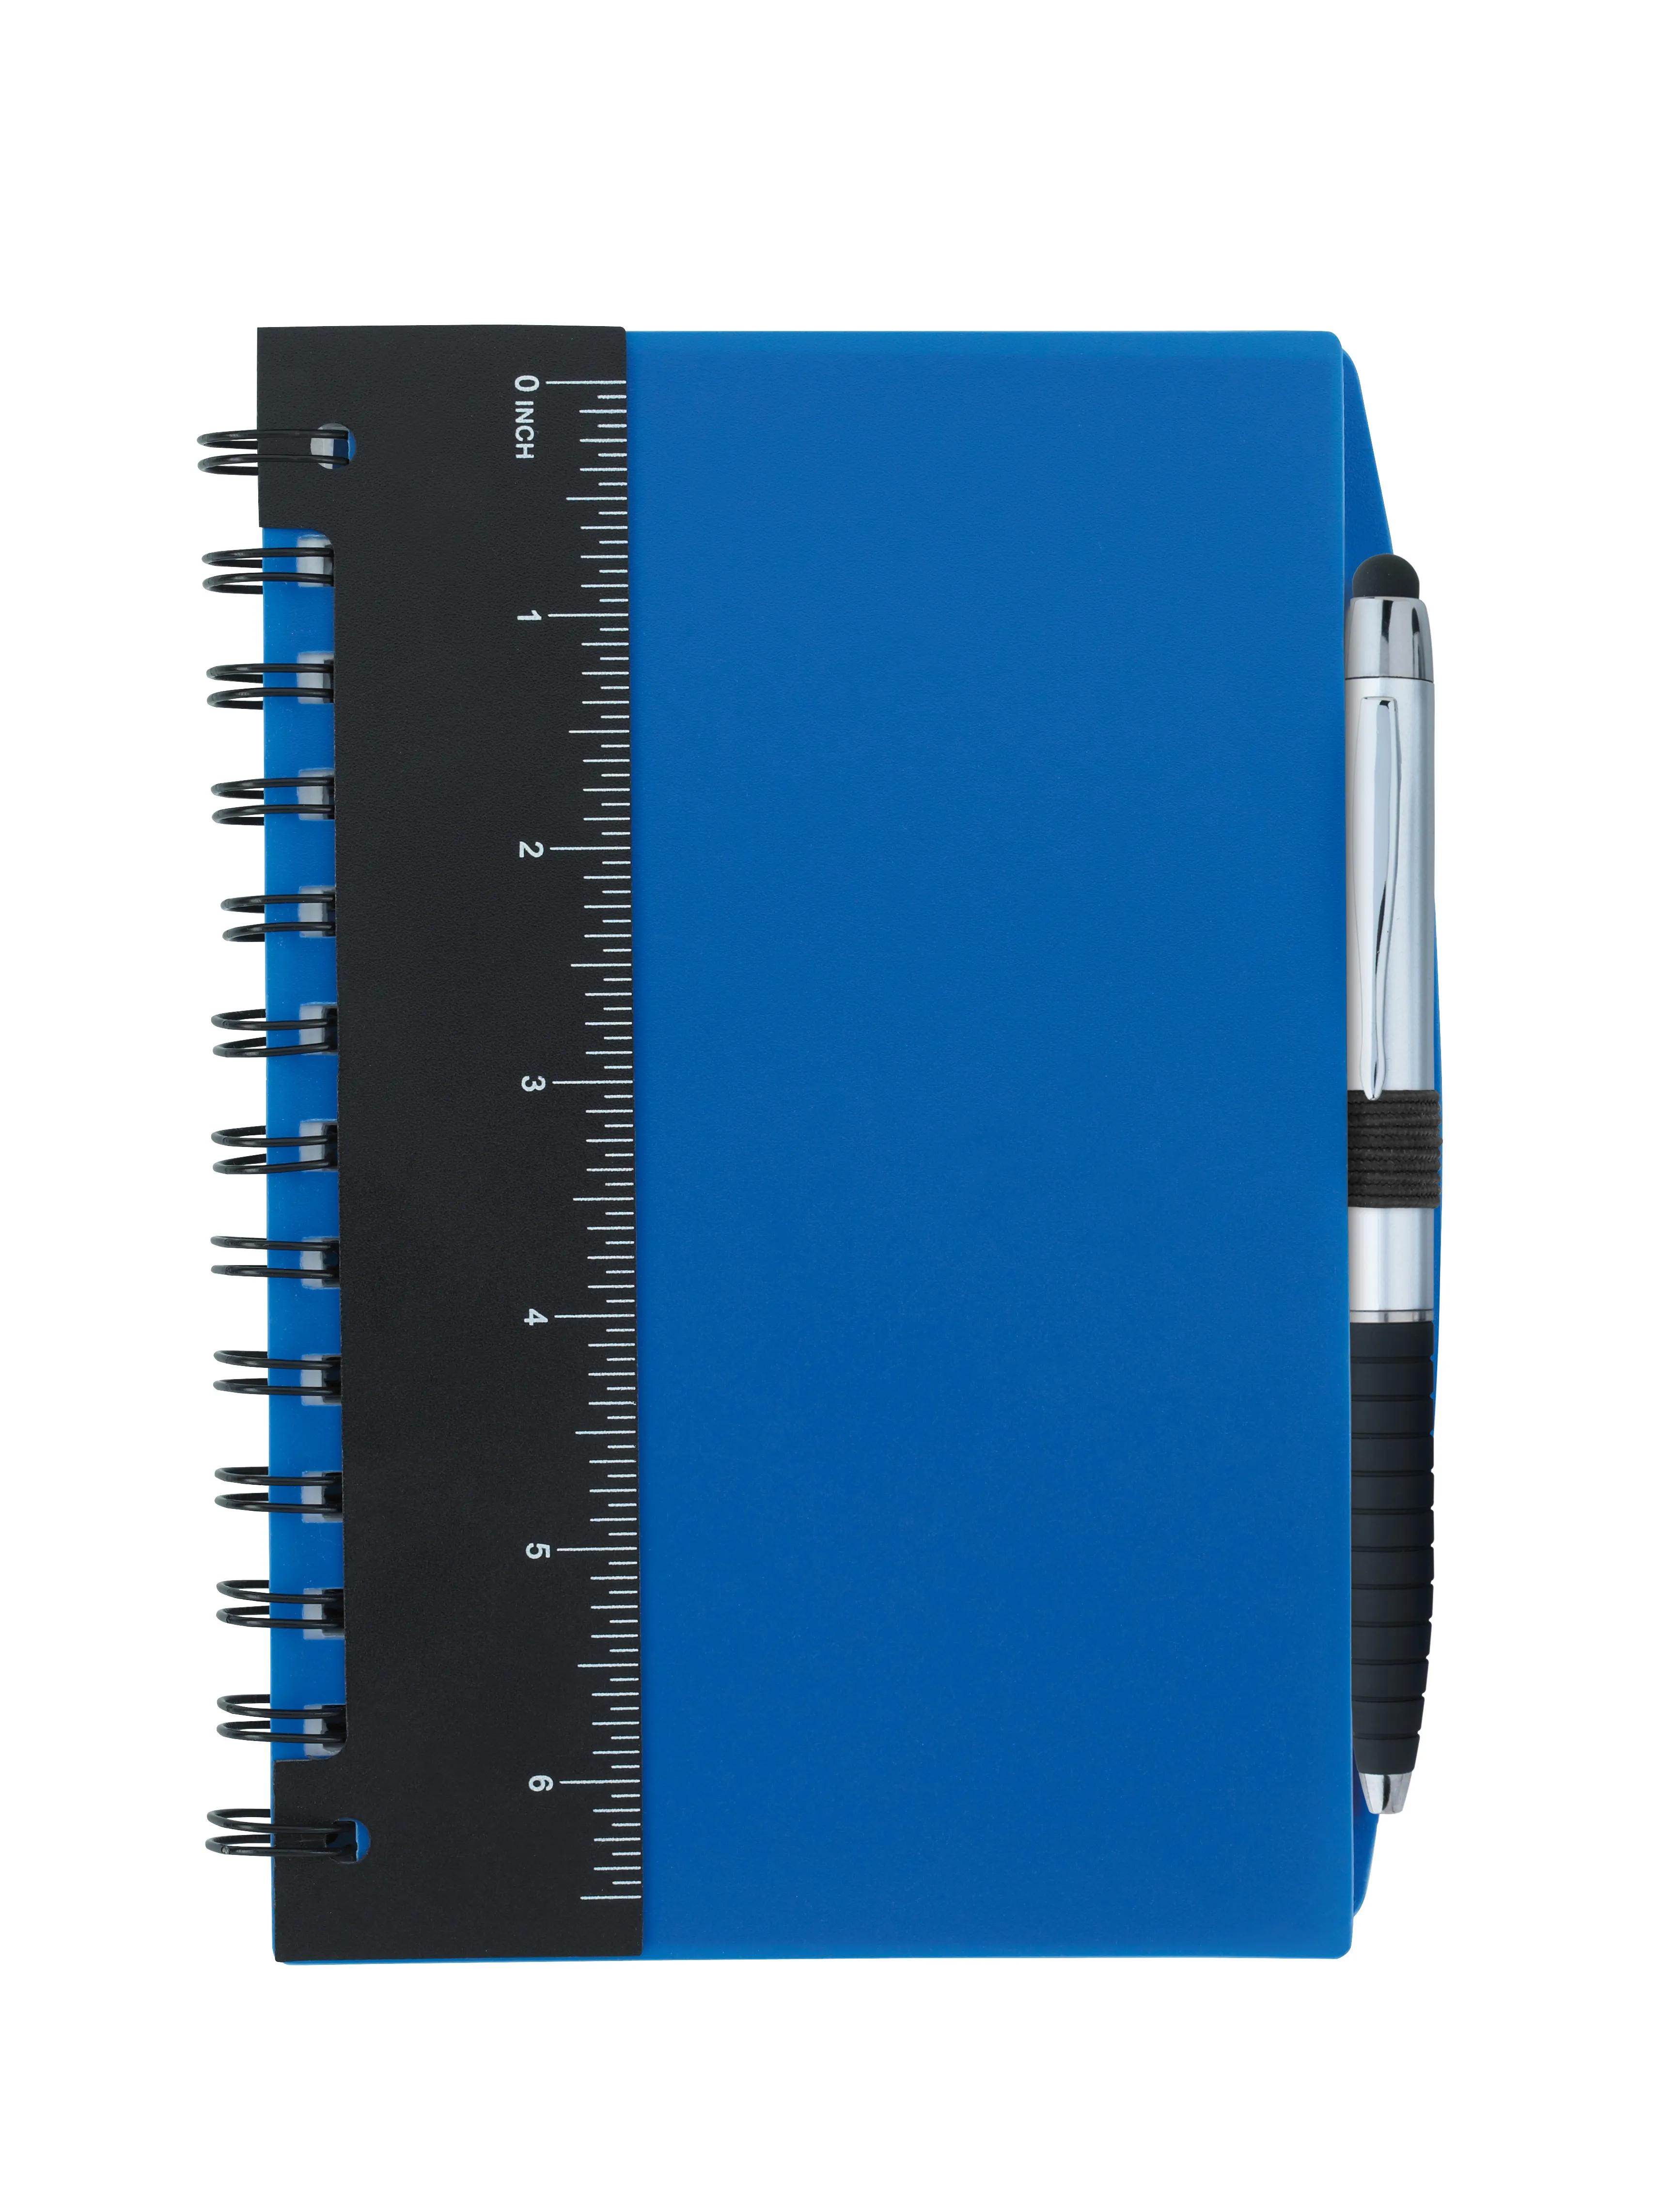 5” x 7” Ruler Notebook with Flags and Stylus Pen 1 of 11